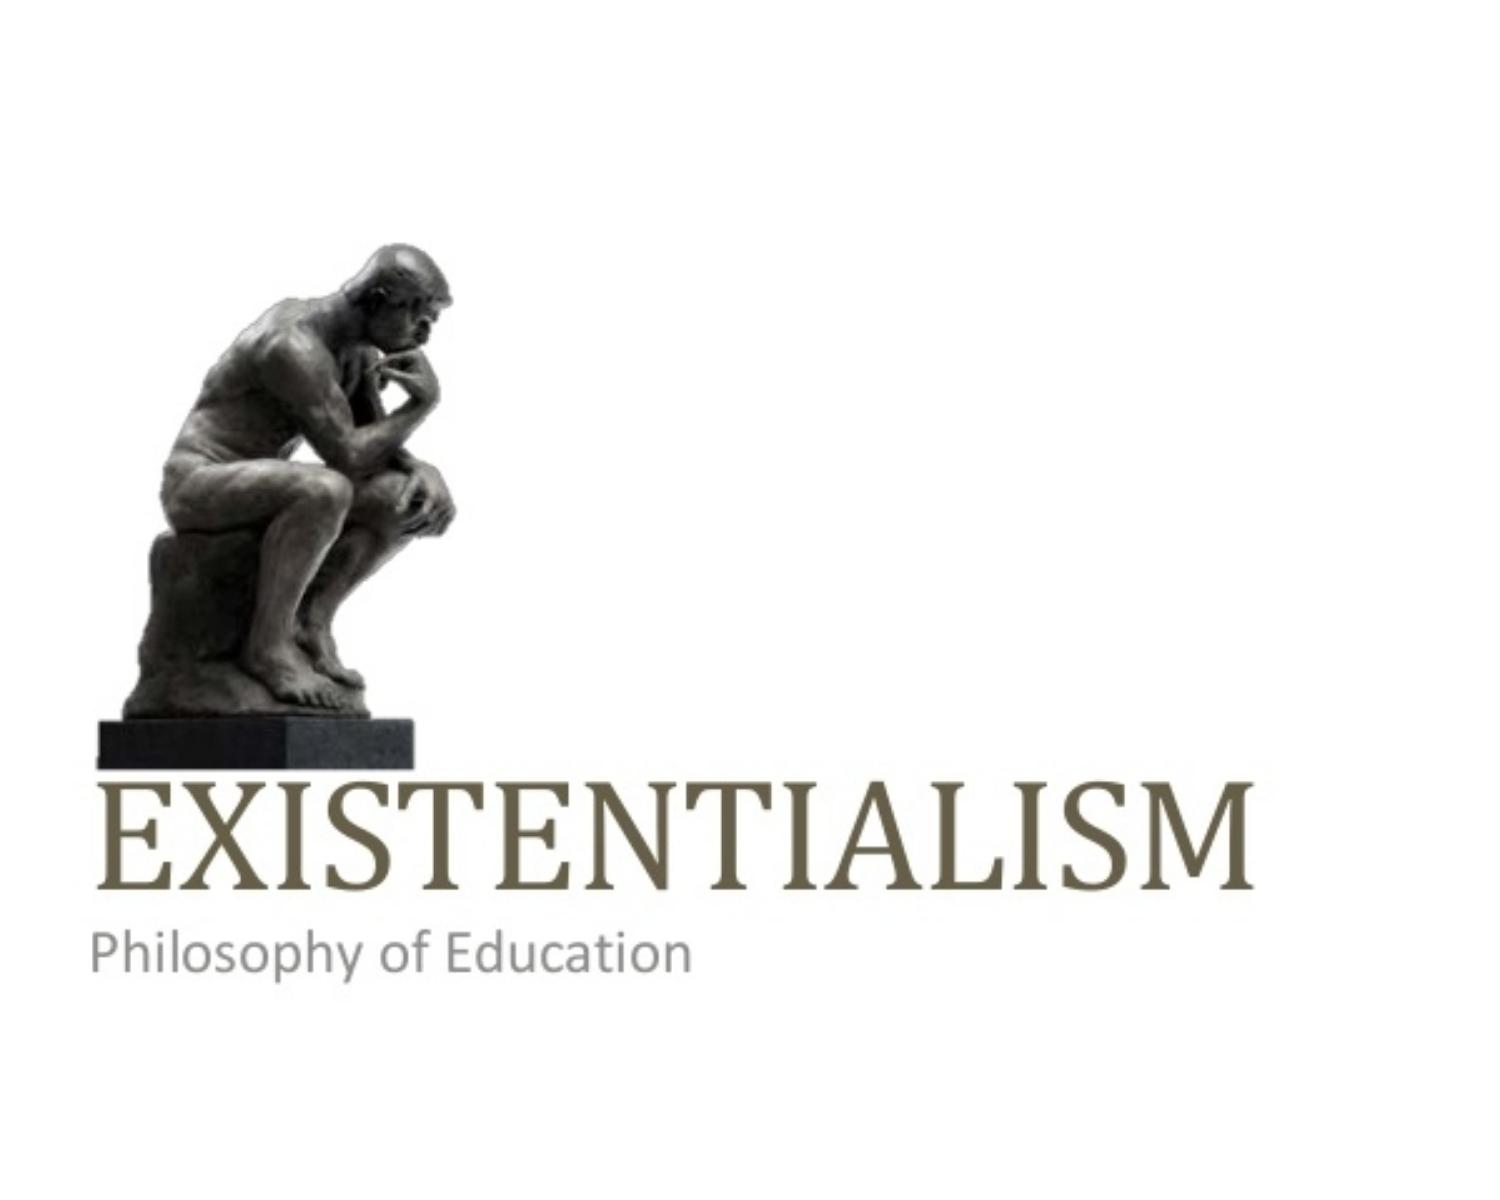 What is existentialism?